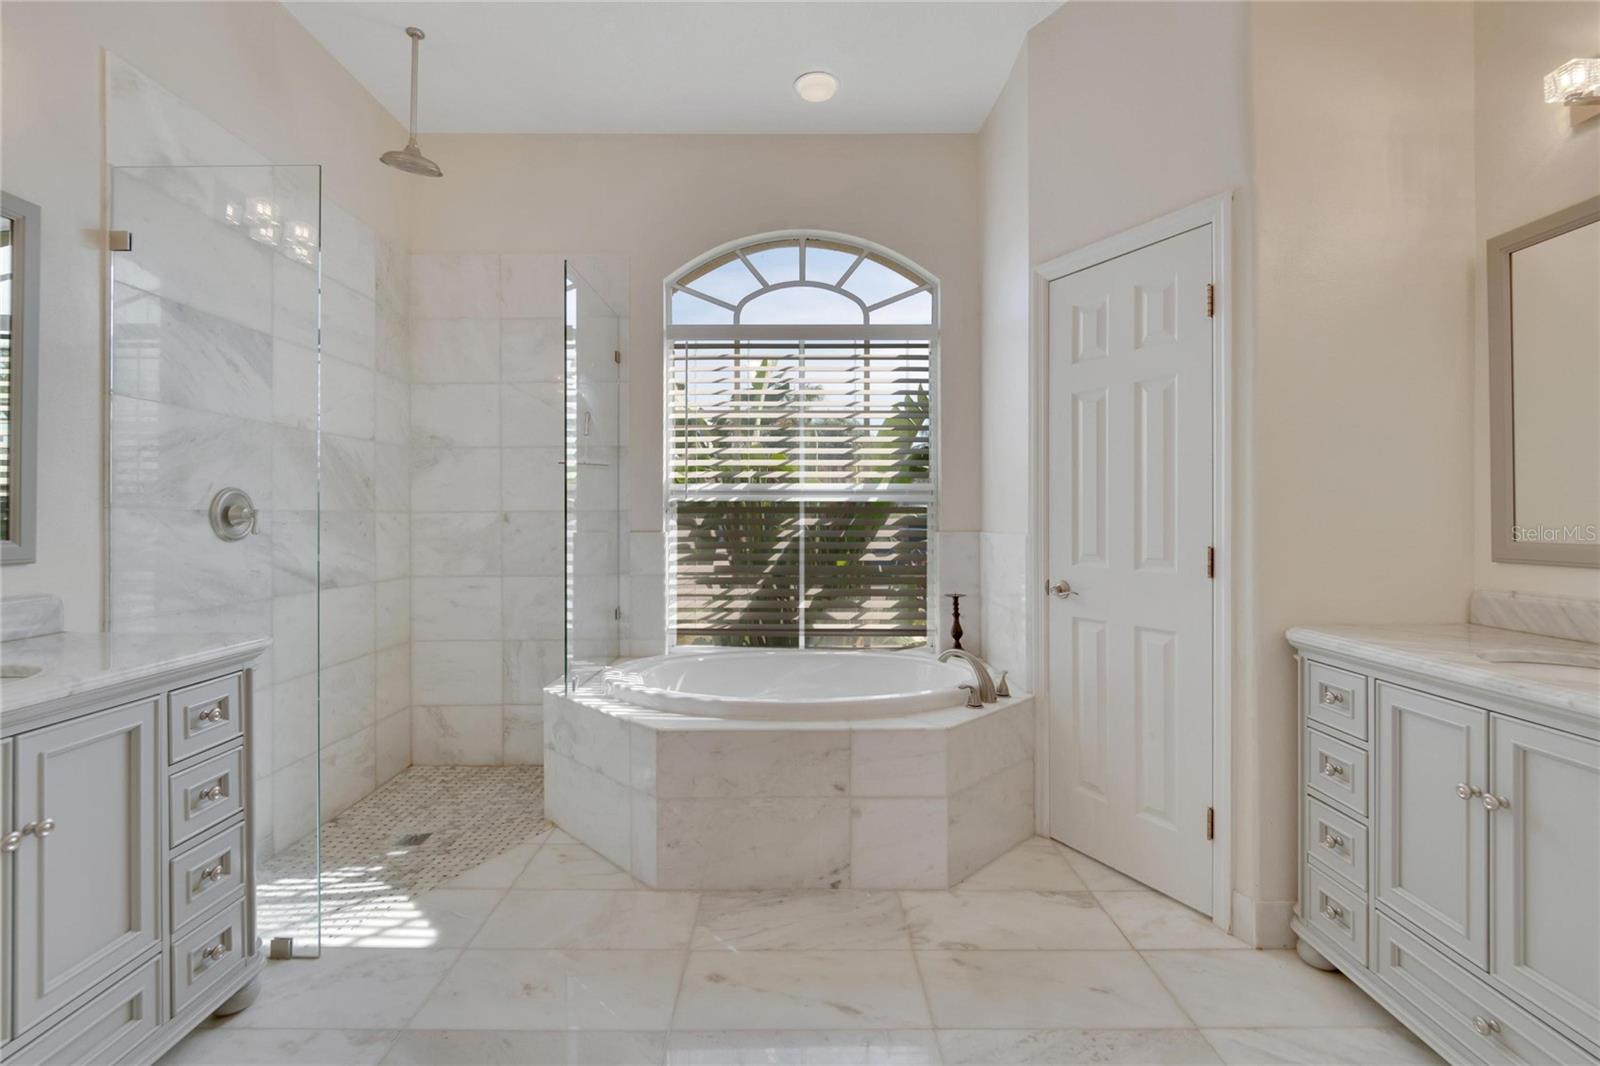 Primary Bathroom w/Garden Tub & Marble Finishes